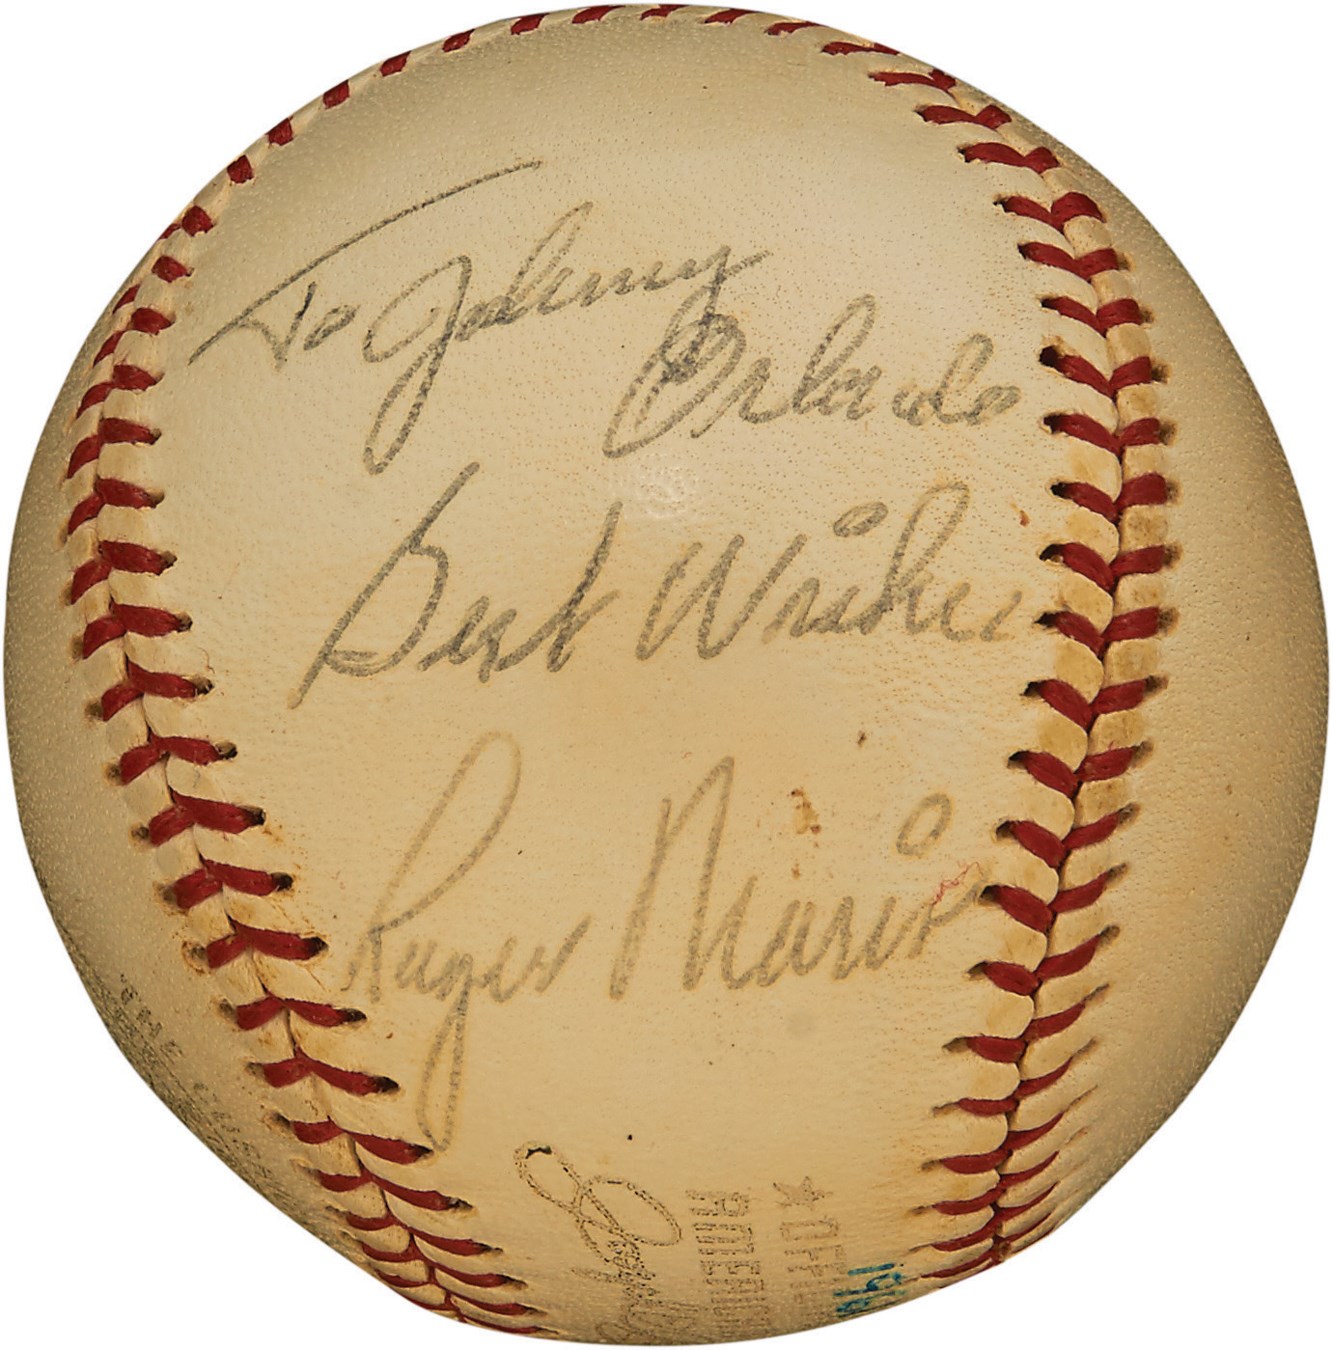 1961 Roger Maris Signed Inscribed Baseball to Red Sox Equipment Manager (PSA)